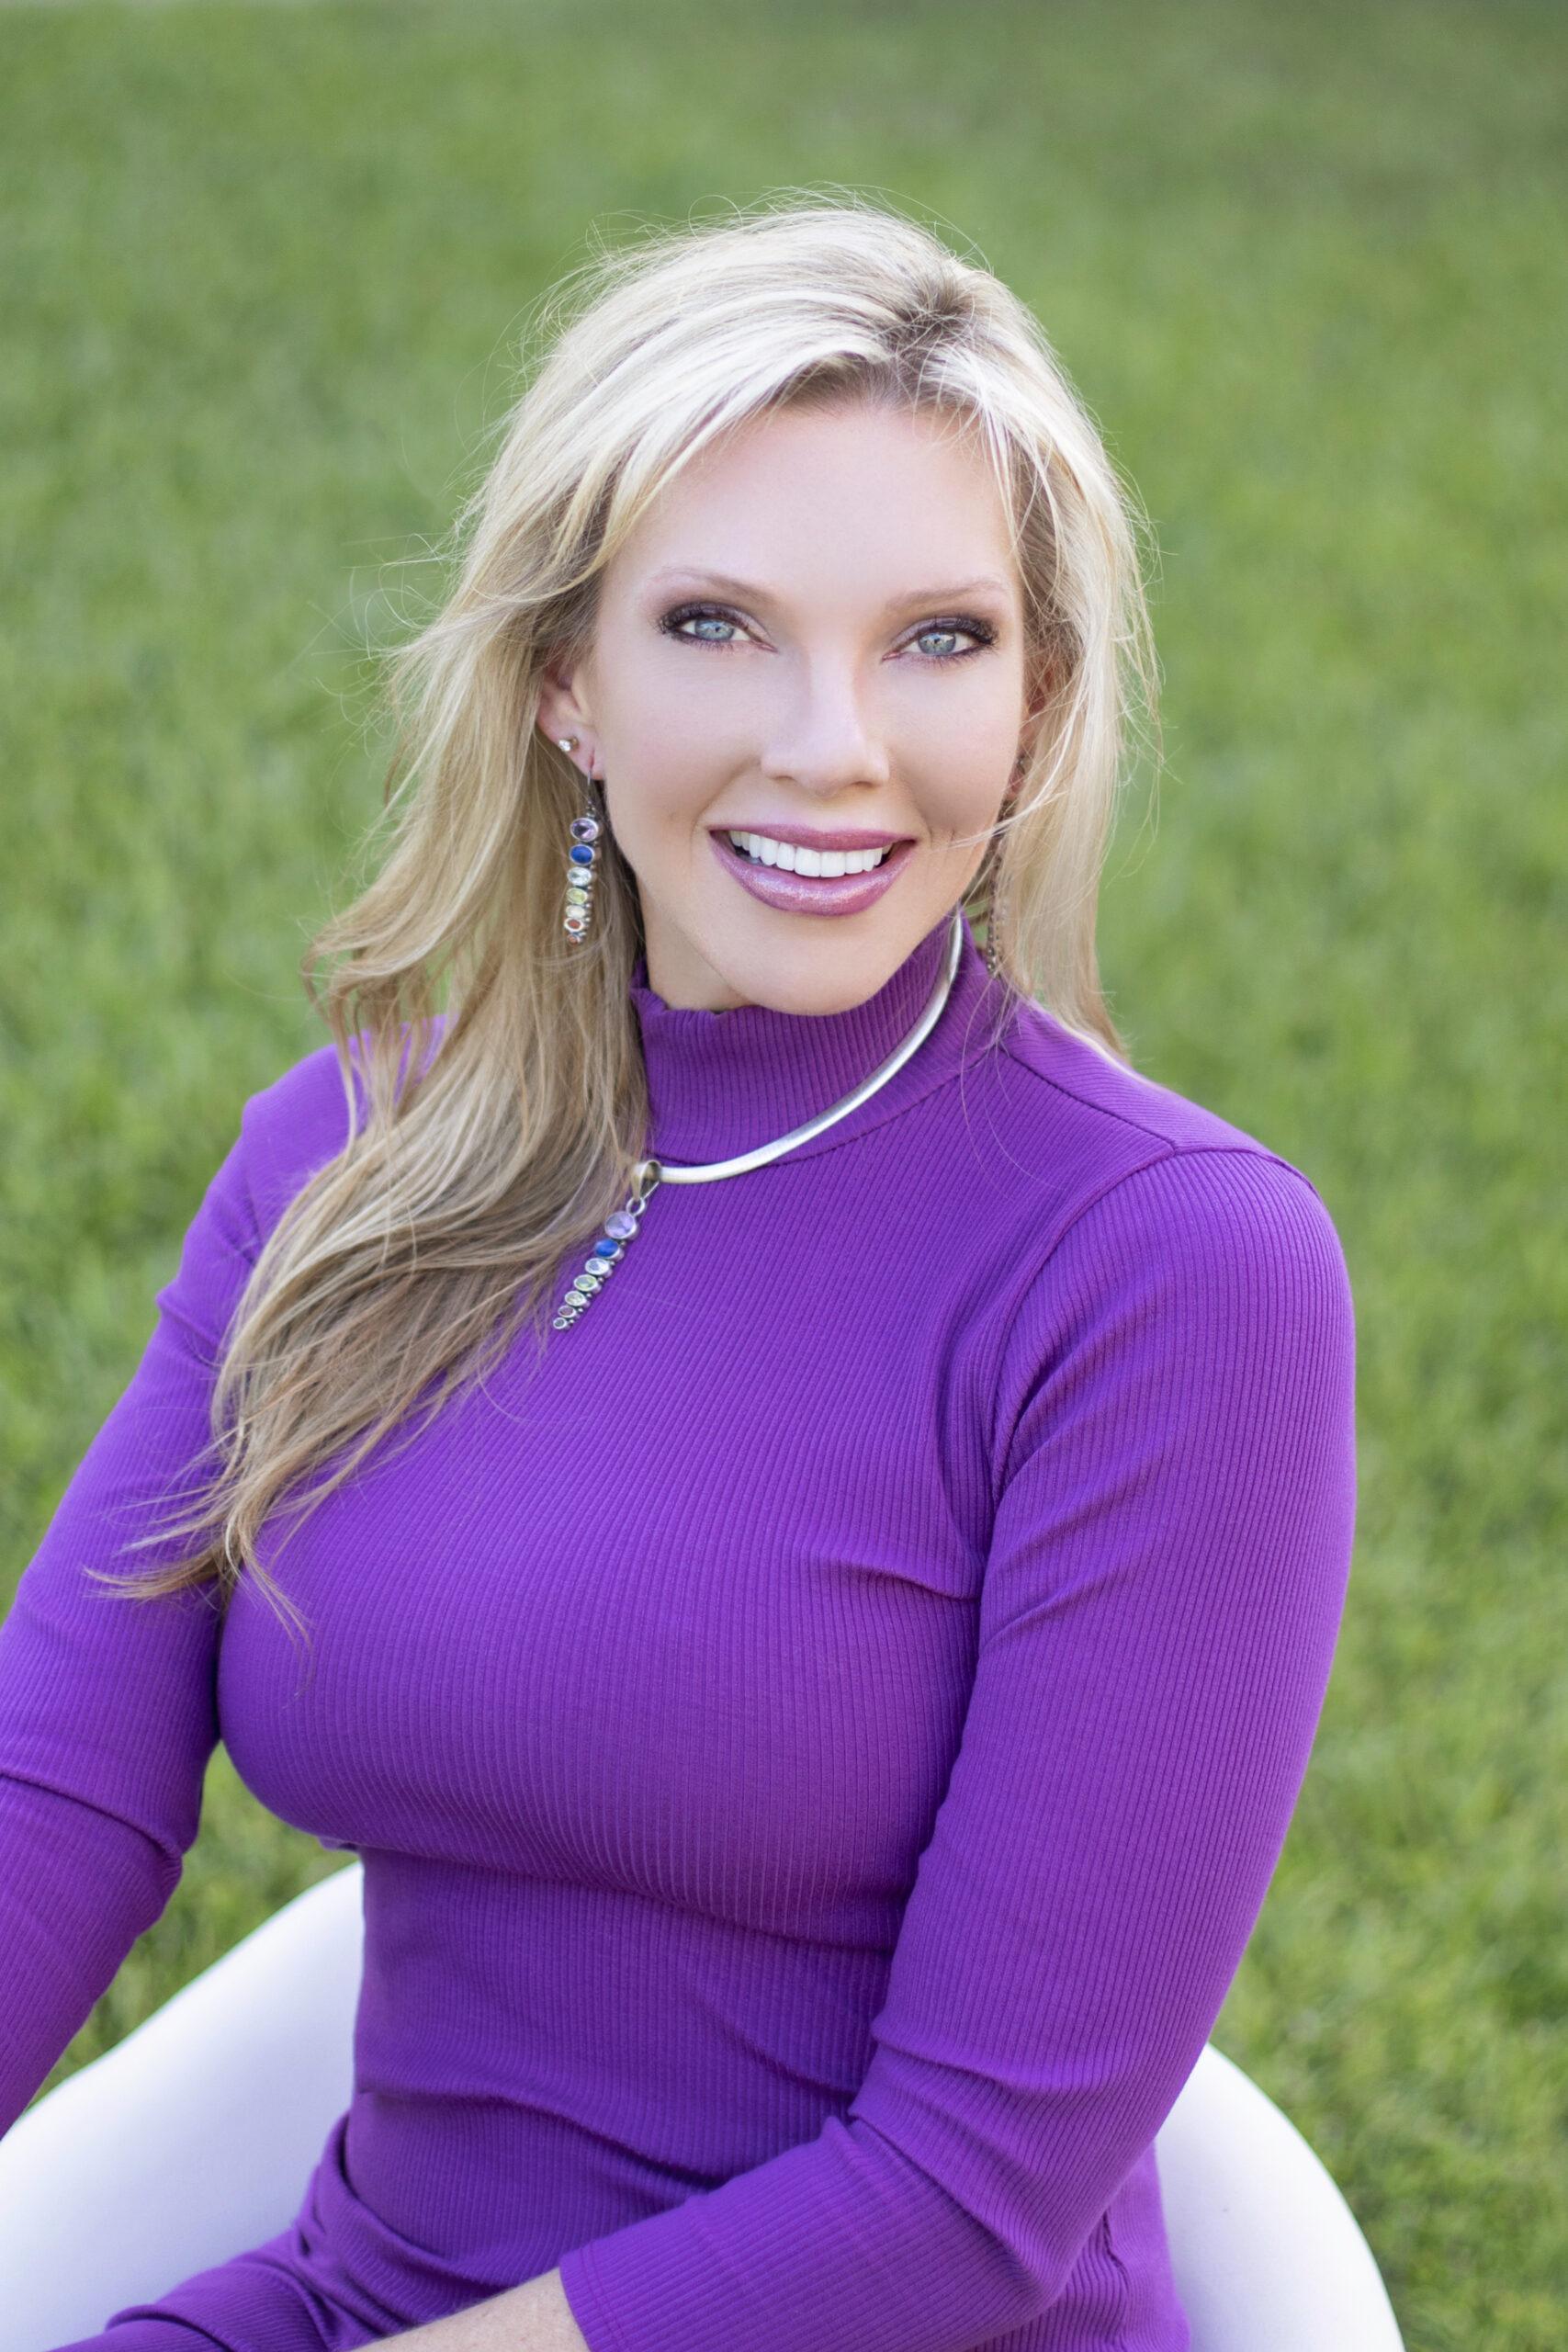 Woman in purple top smiling outdoors.